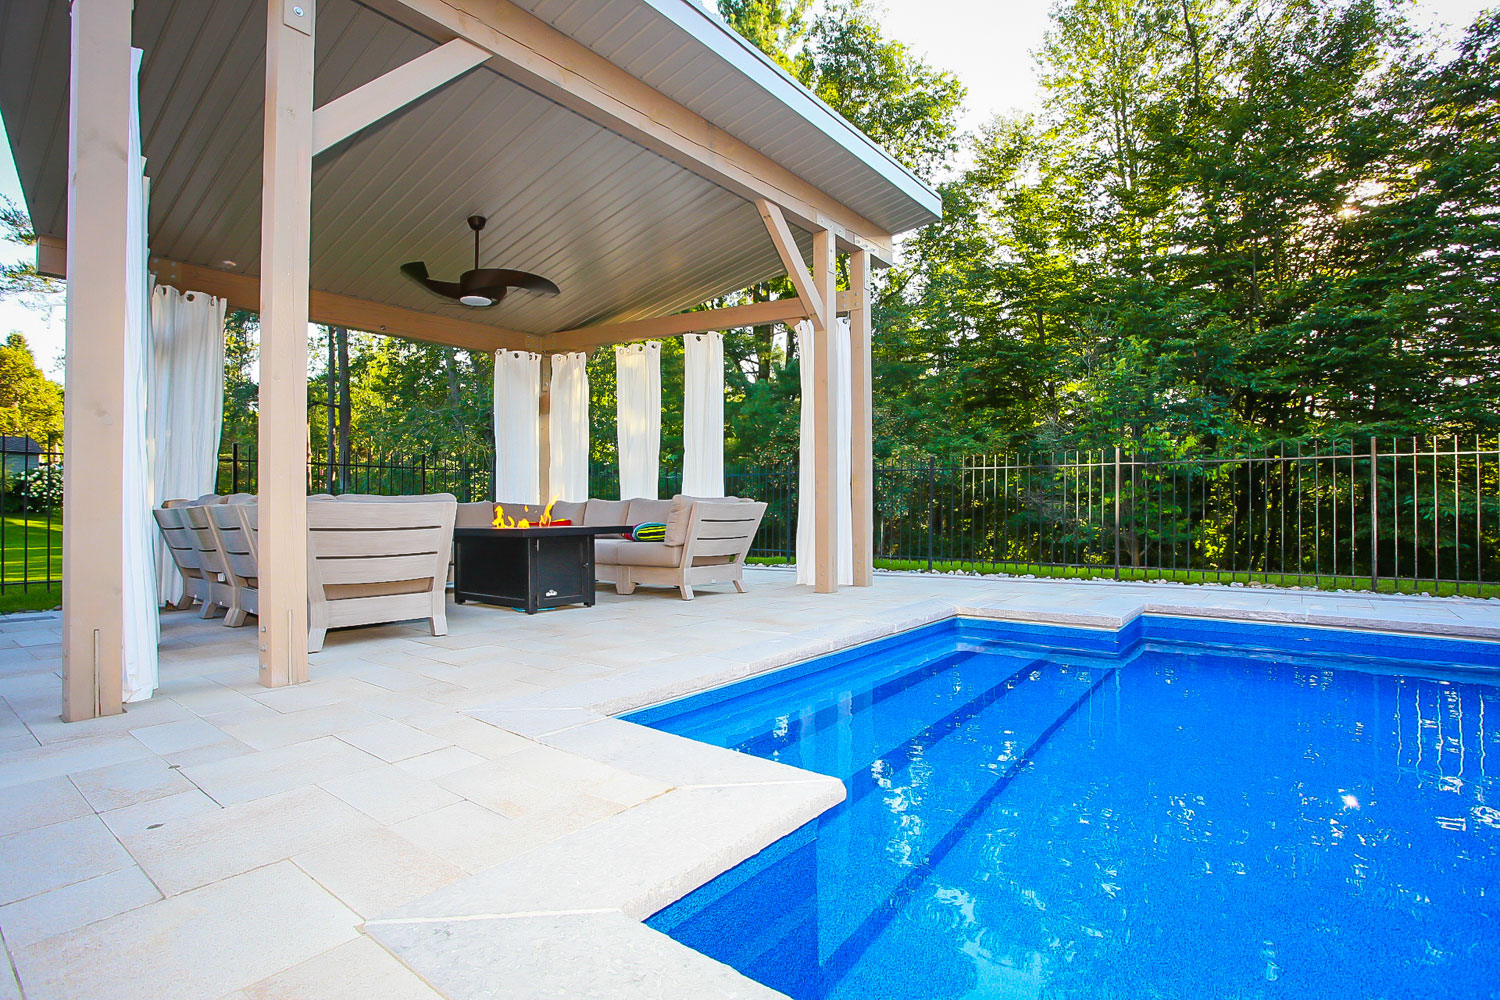 Outdoor home renovation project - a pool side cabana with a fireplace